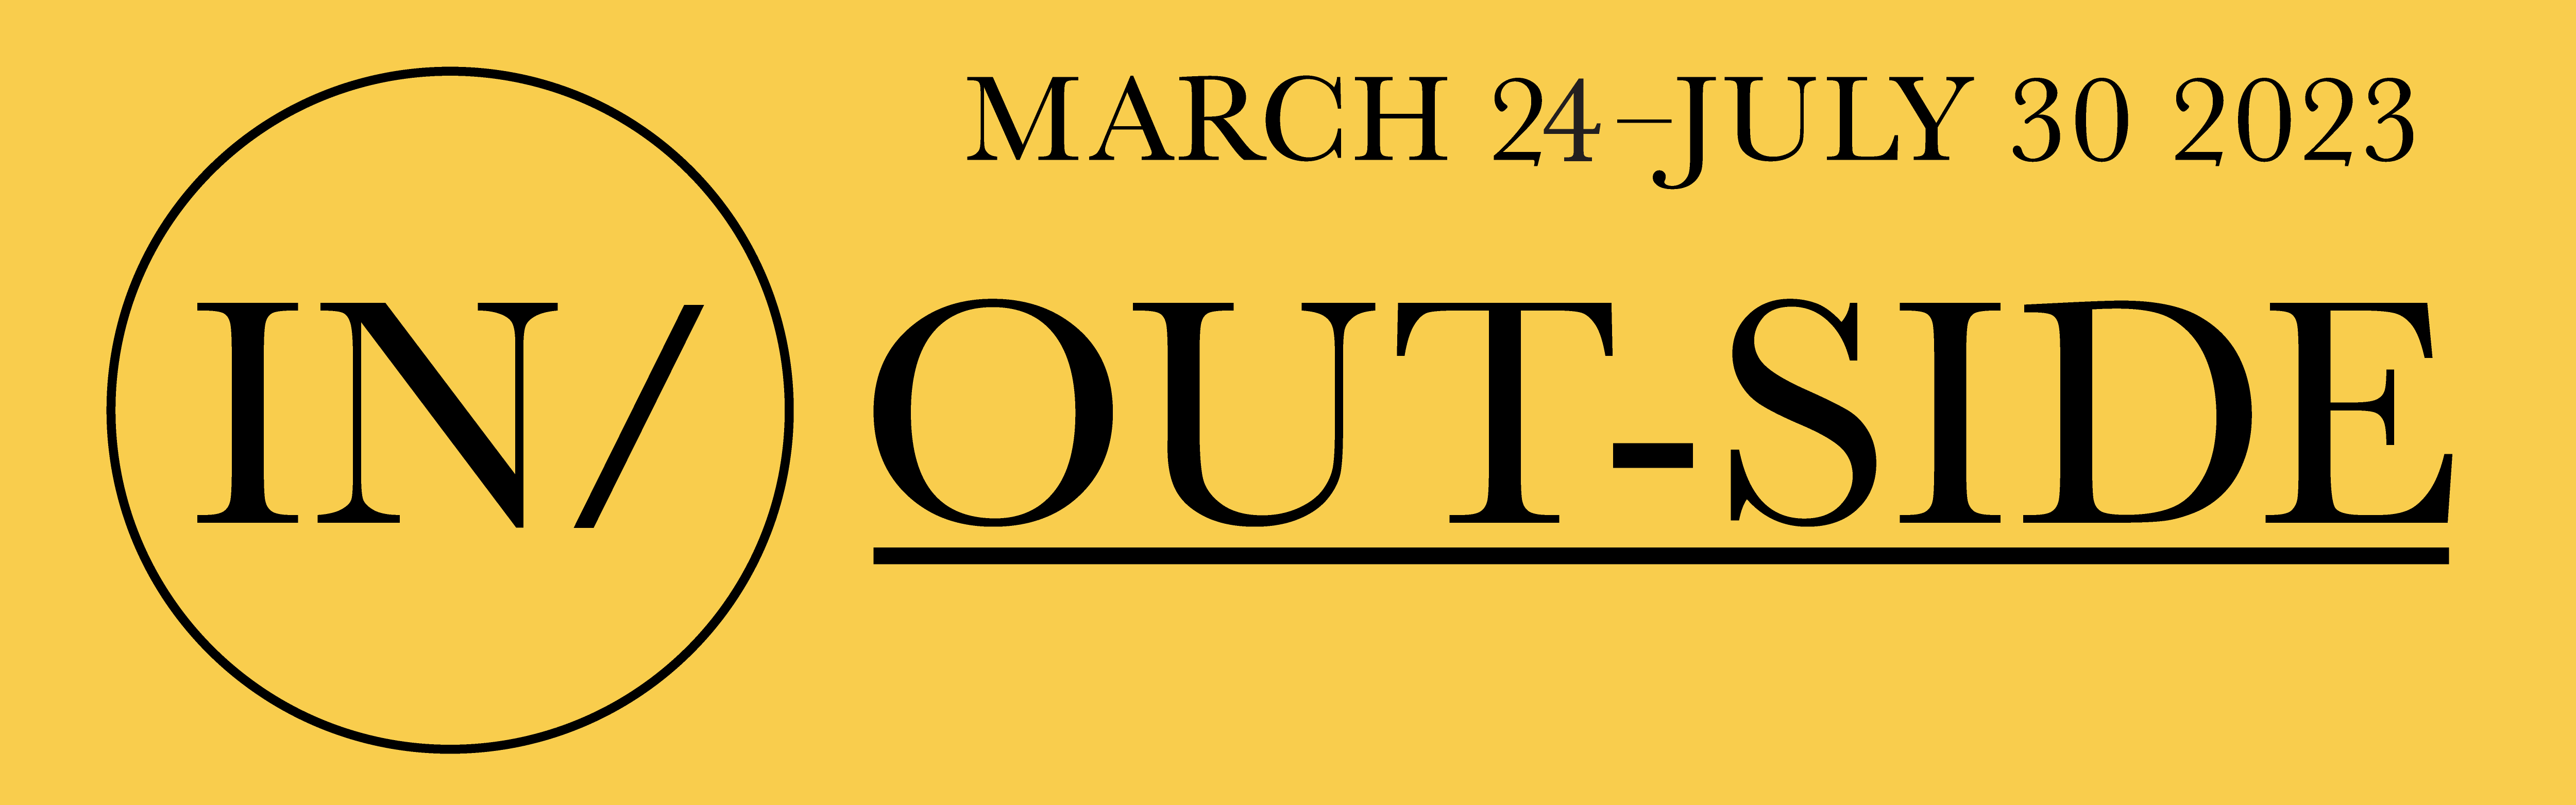 In/Out-Side Exhibition, March 24 - July 30, 2023; Website Banner